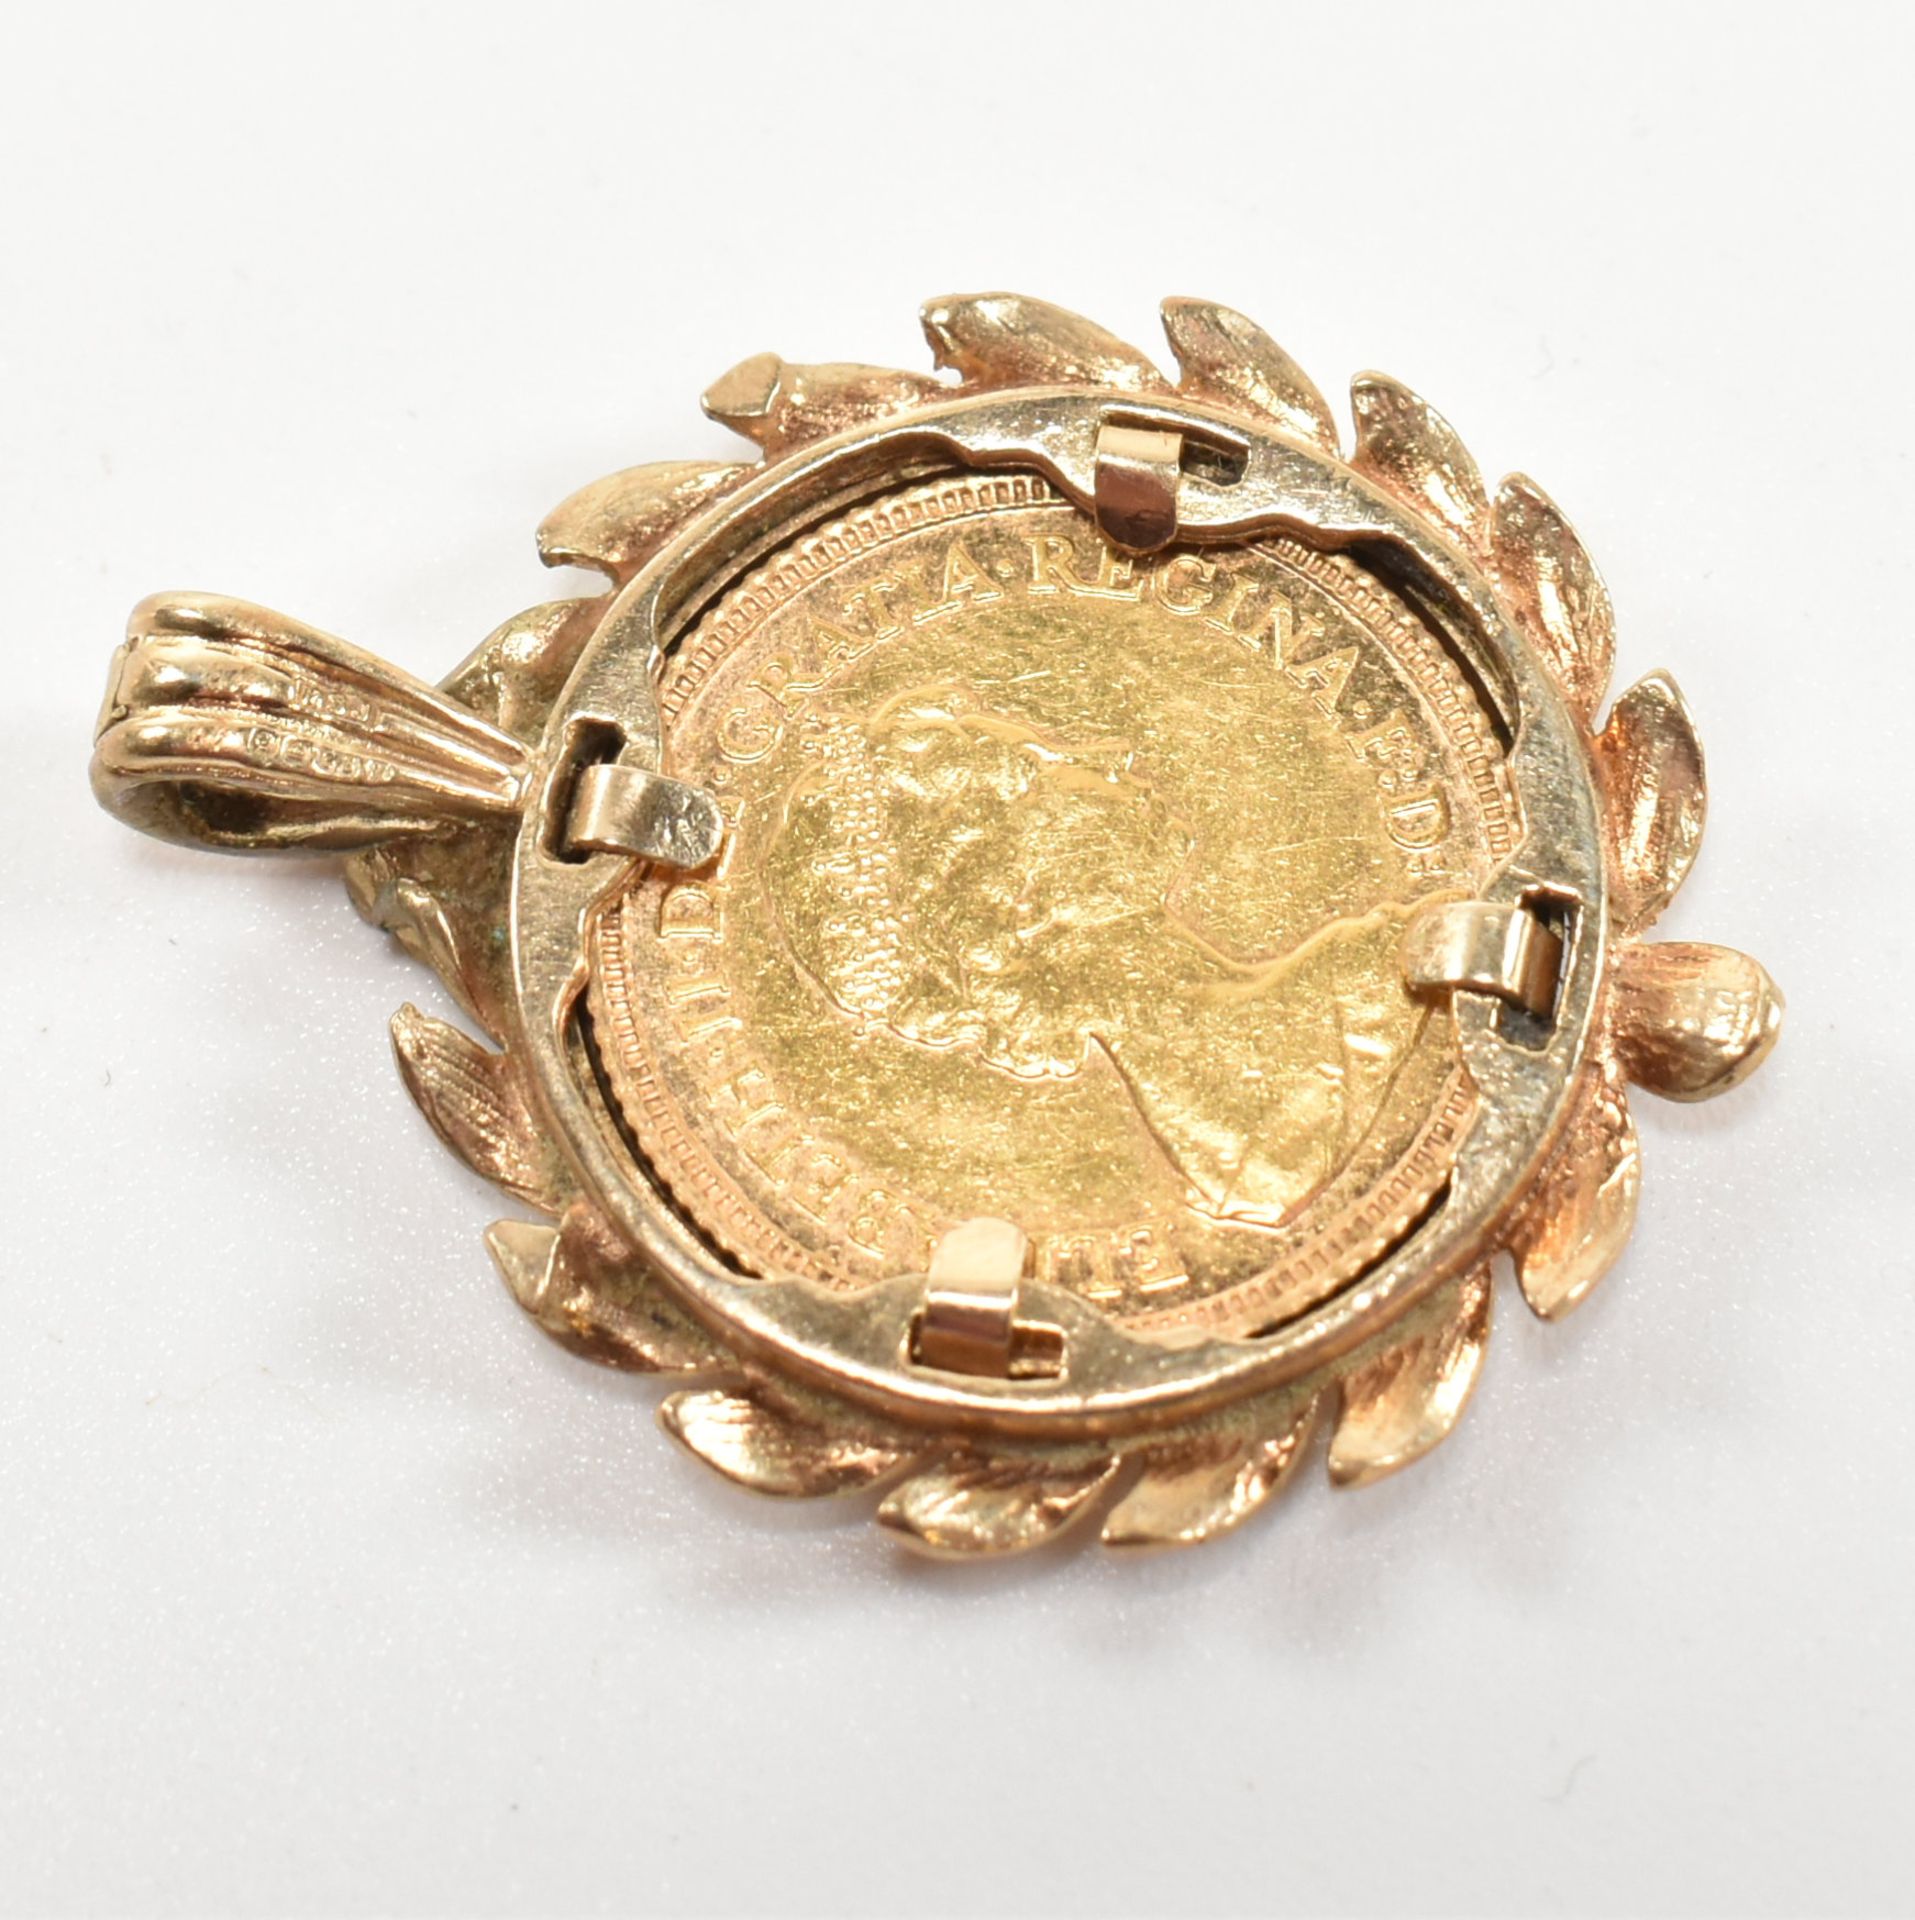 HALLMARKED 9CT GOLD MOUNTED HALF SOVEREIGN NECKLACE PENDANT - Image 5 of 5